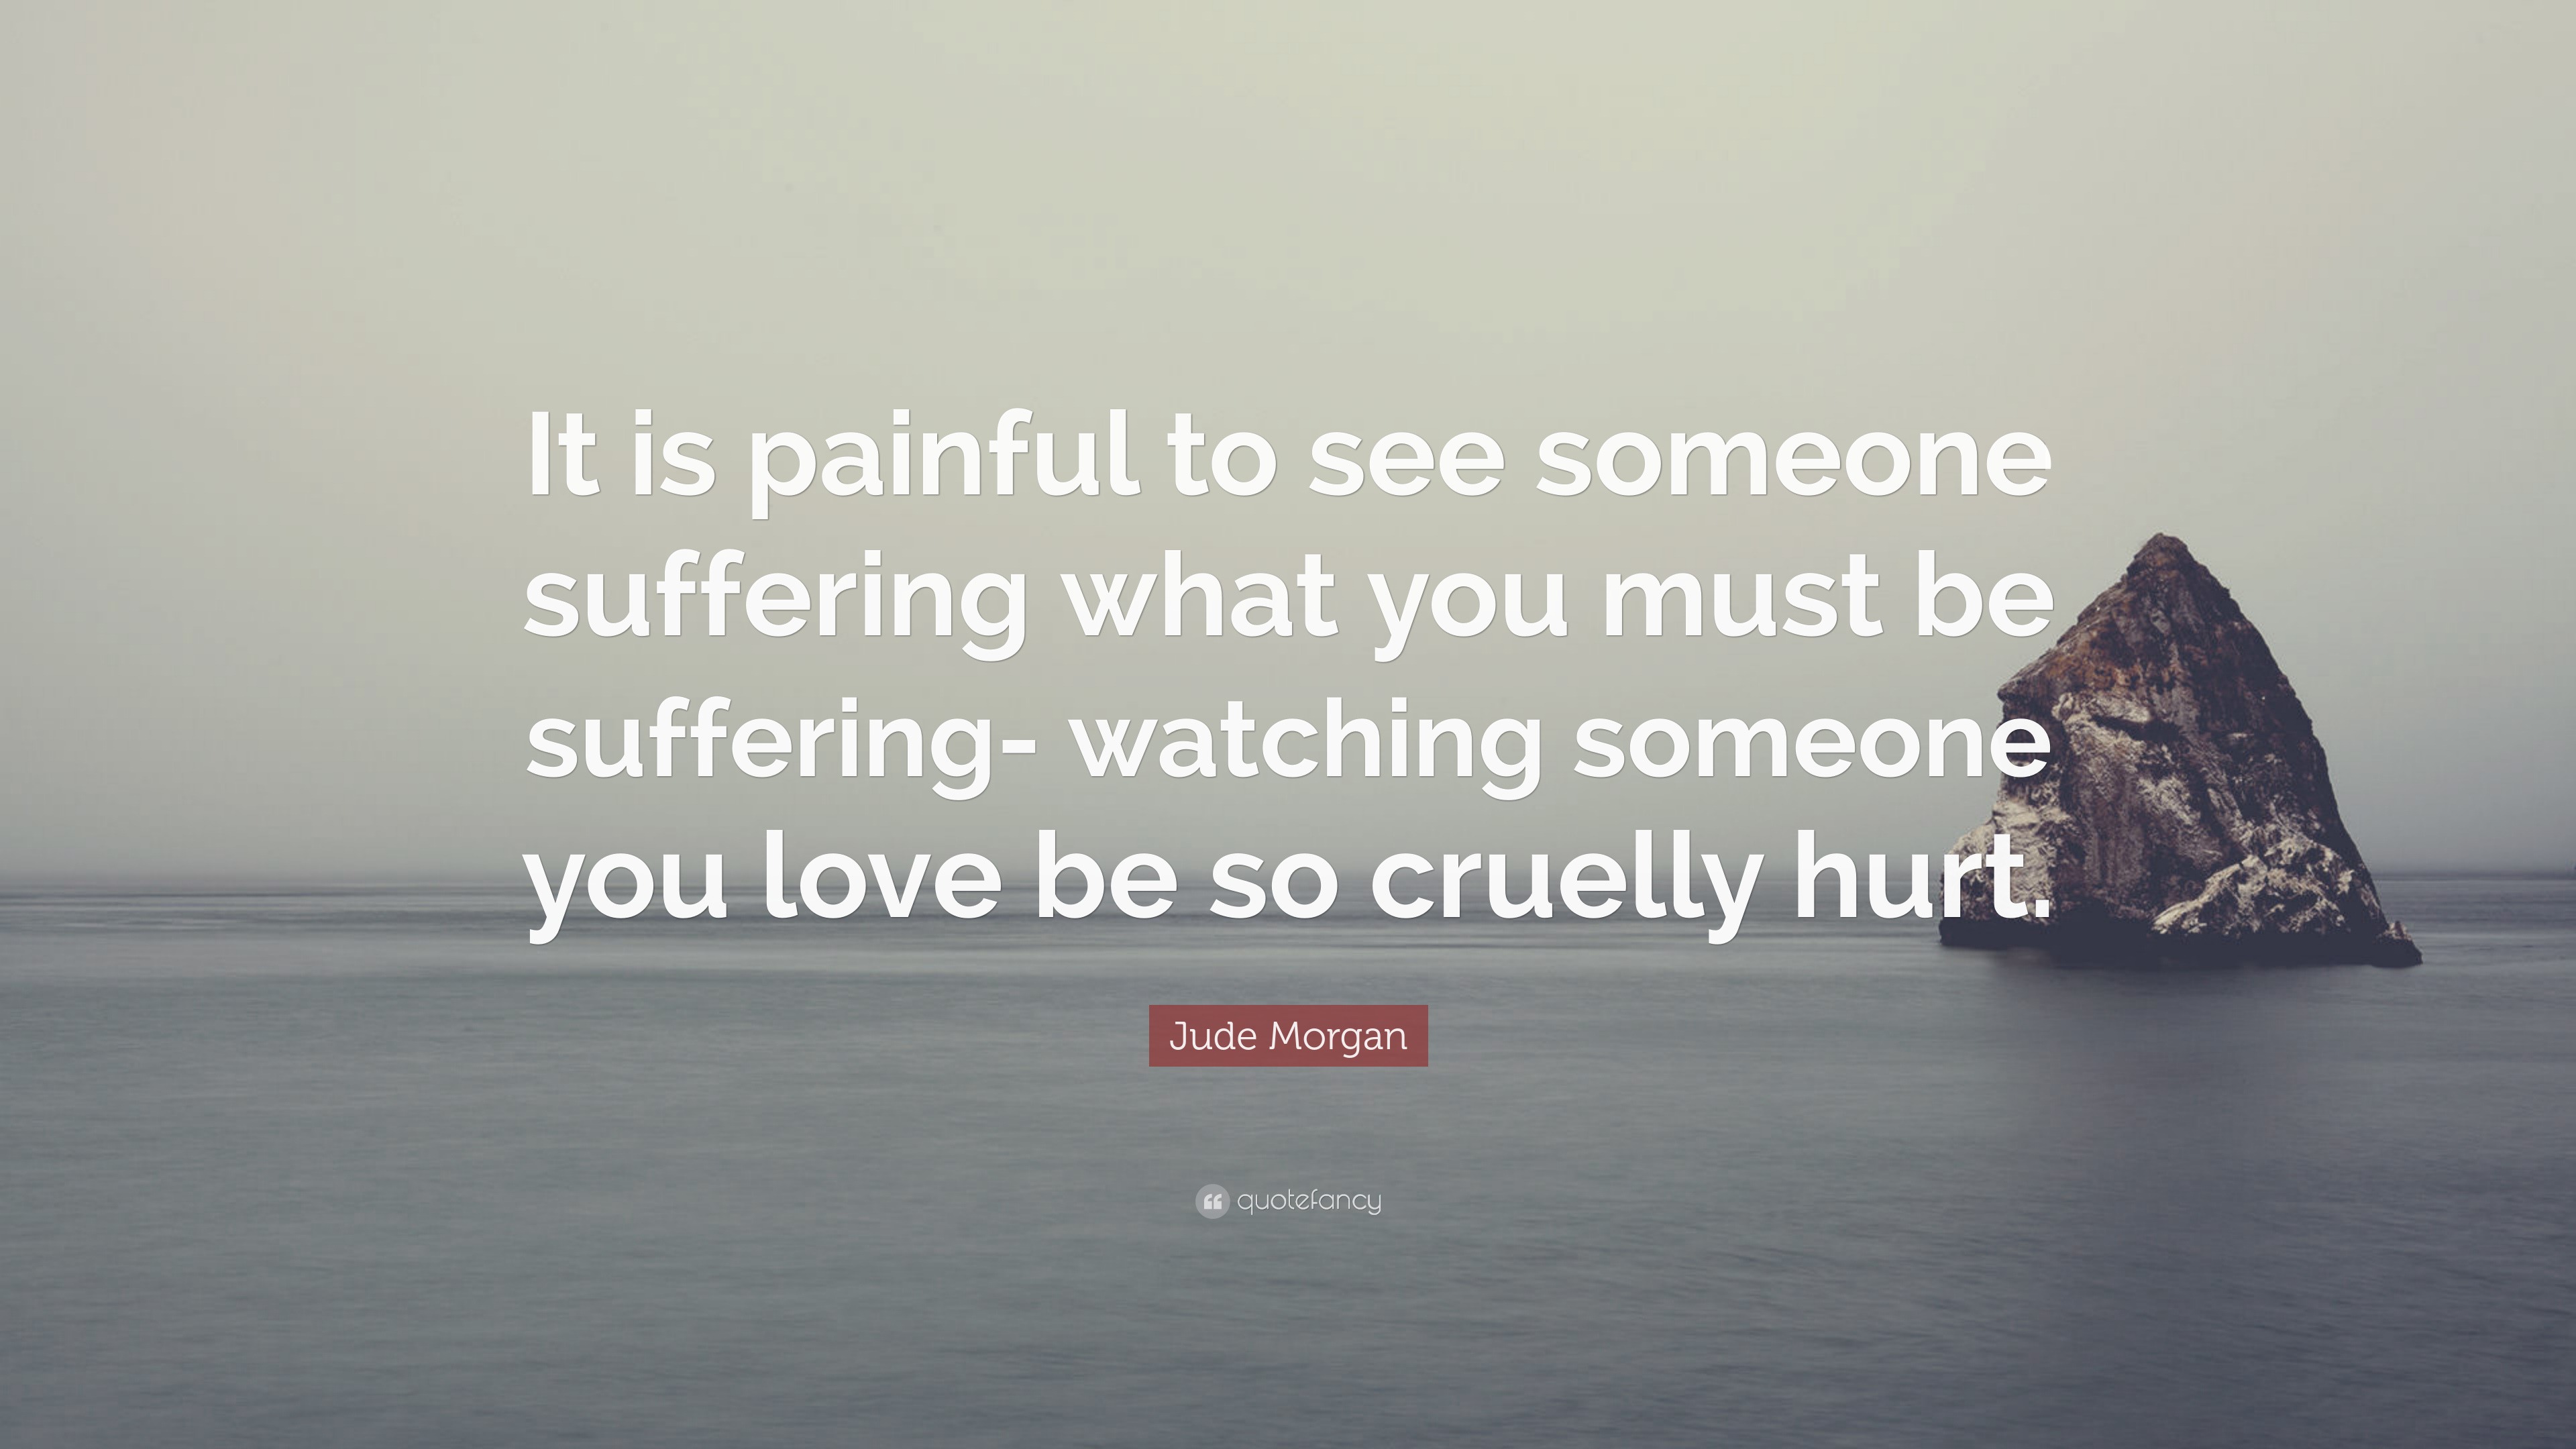 Jude Morgan Quote “It is painful to see someone suffering what you must be